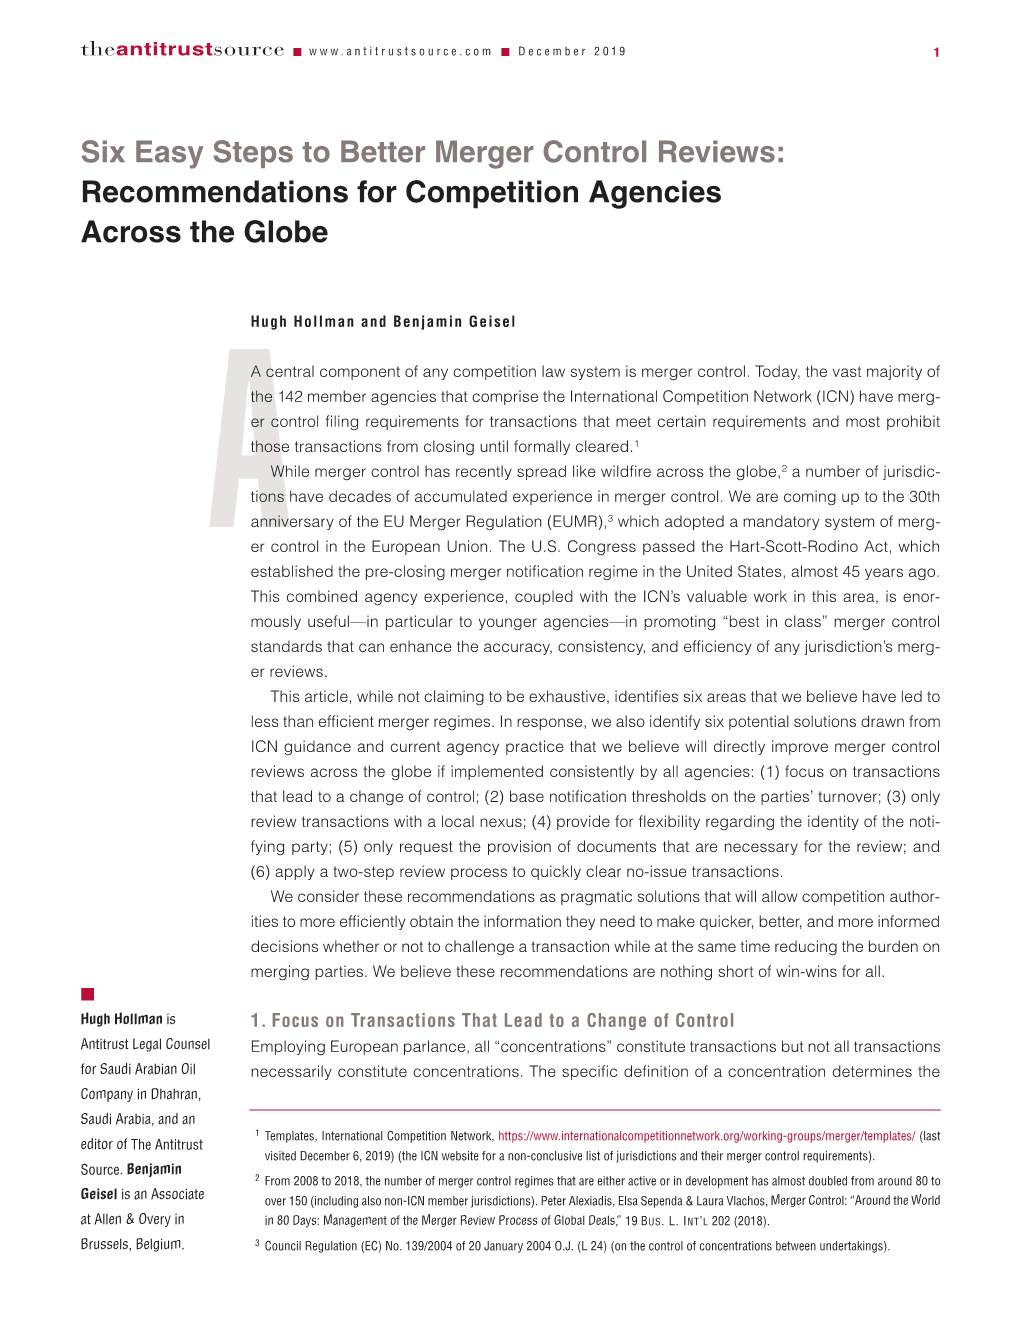 Six Easy Steps to Better Merger Control Reviews: Recommendations for Competition Agencies Across the Globe